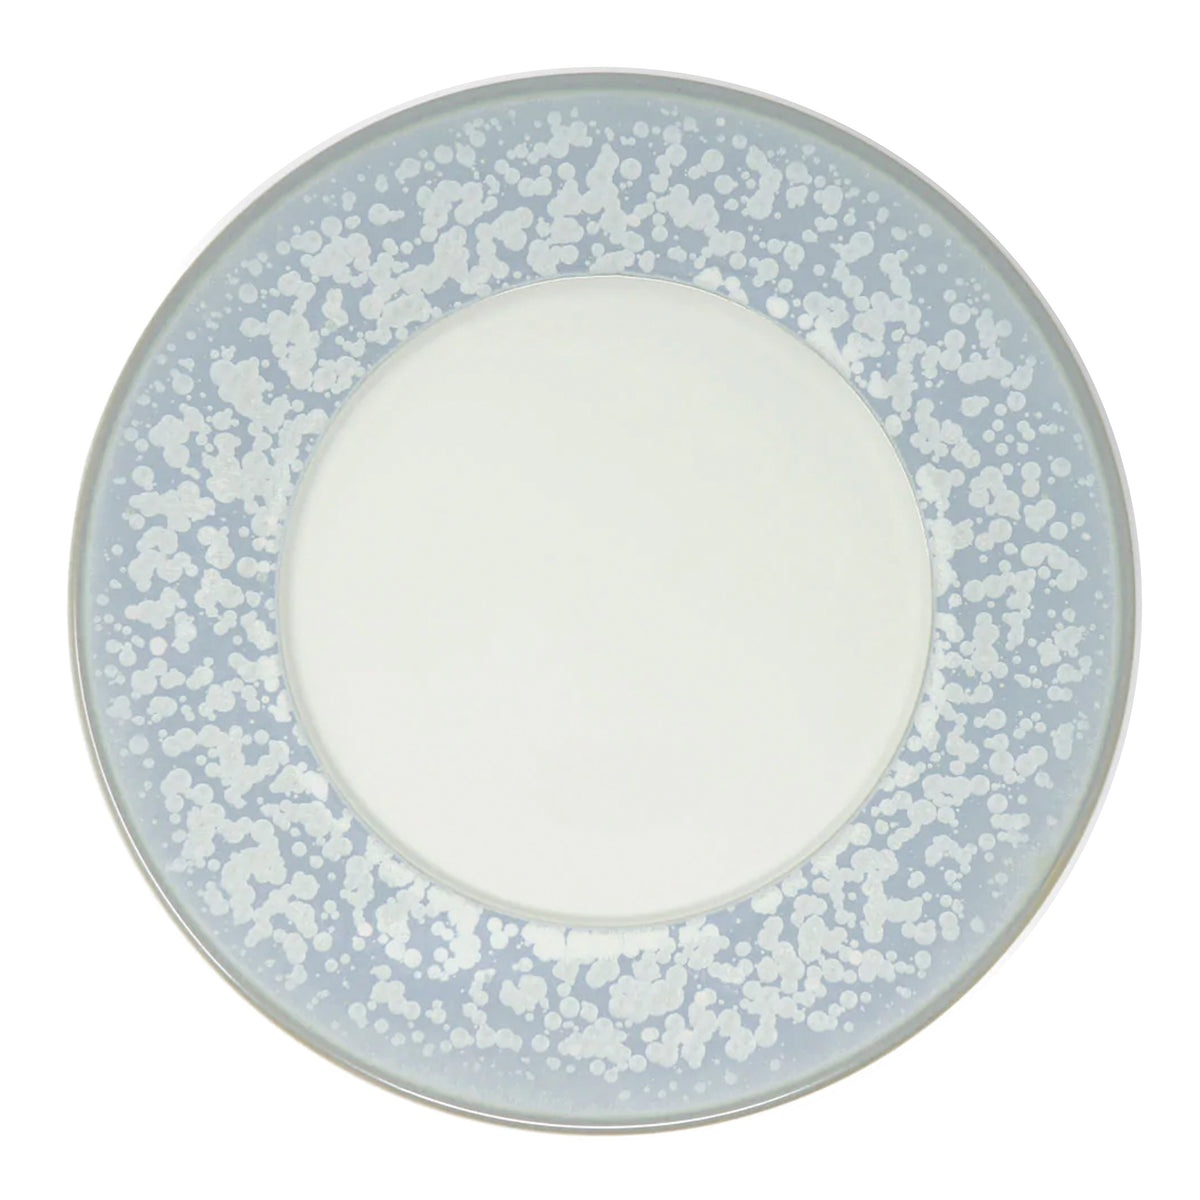 SONG Ocean - Charger plate, 2011